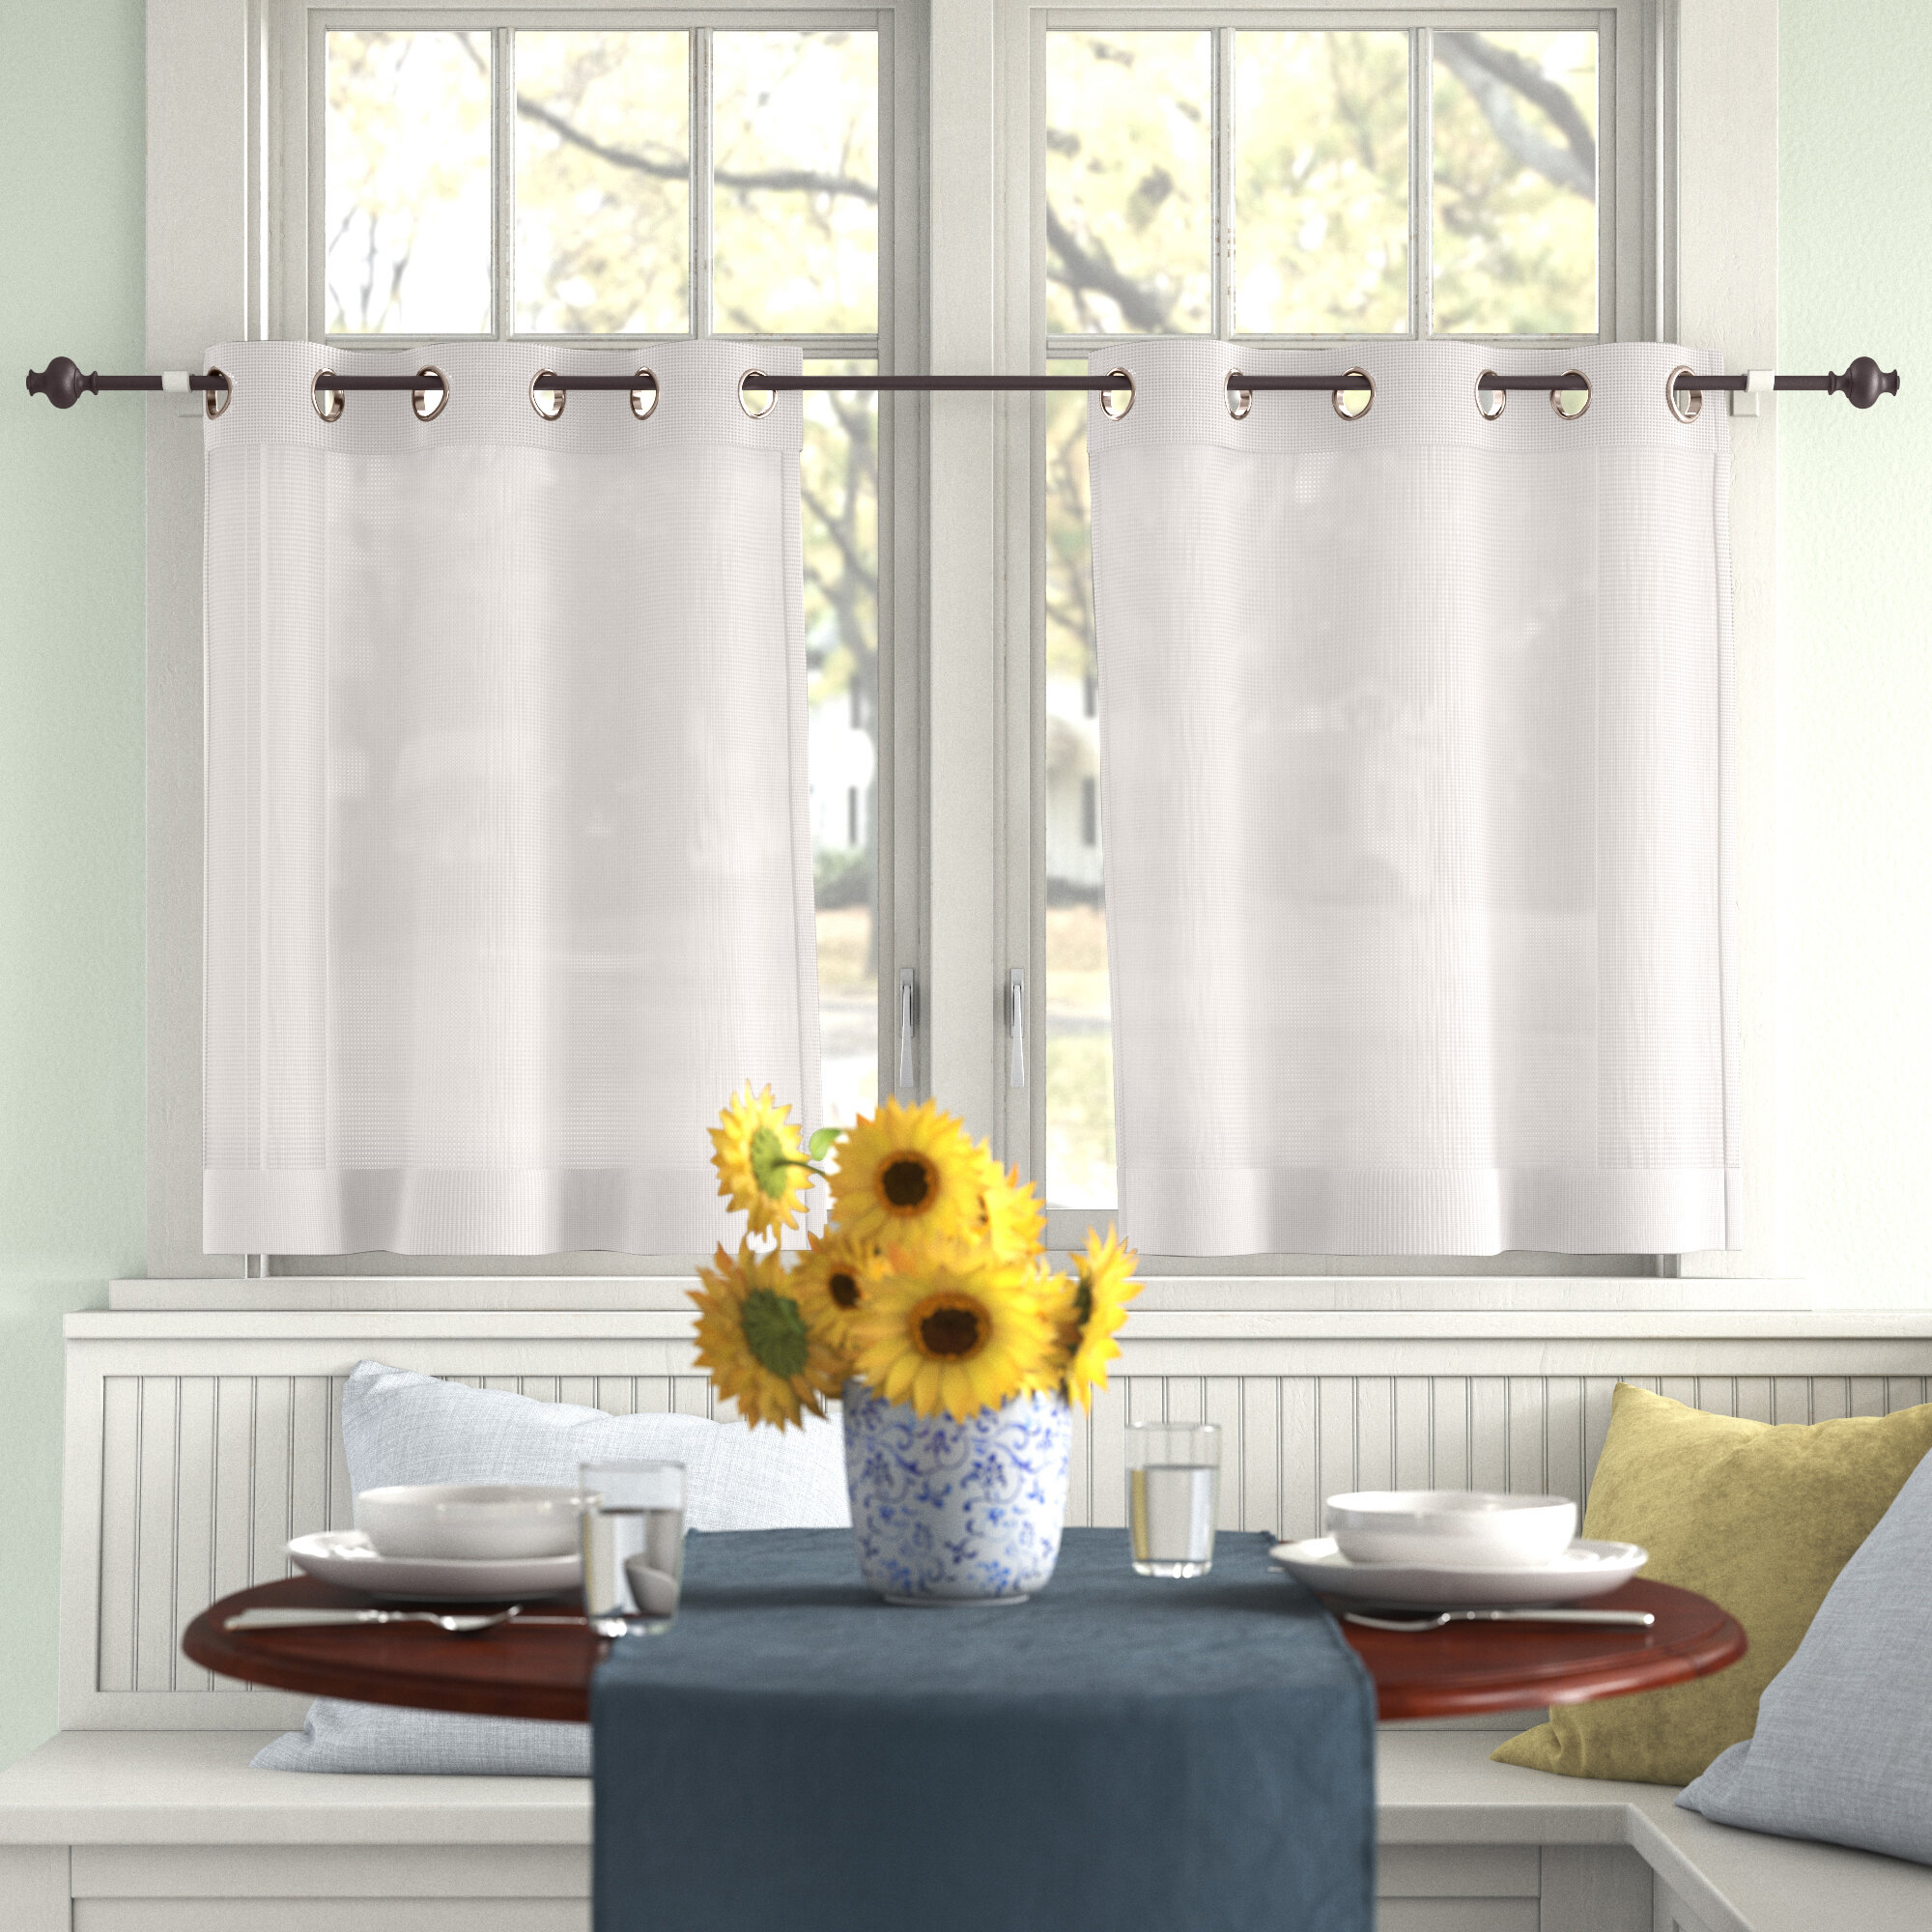 Curtains valances for Living Room Thick Double-Sided Chenille Swag Decorative Curtains for Bedroom Windows Color : Dark gray Valance, Size : 98 